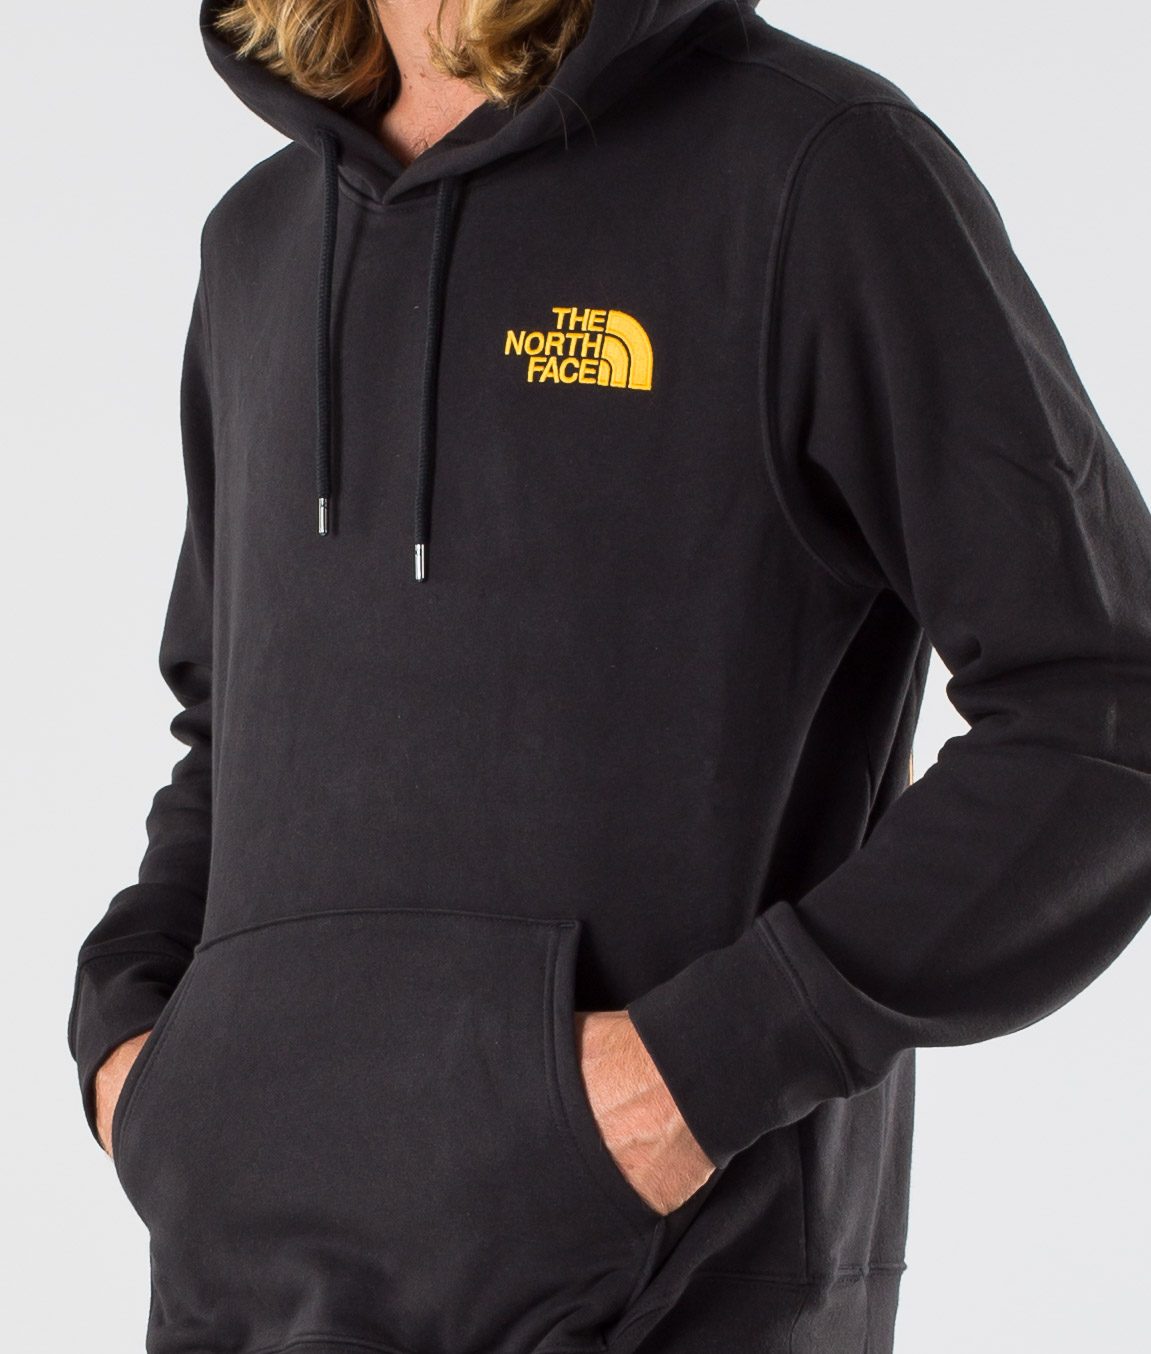 north face walls are meant for climbing hoodie